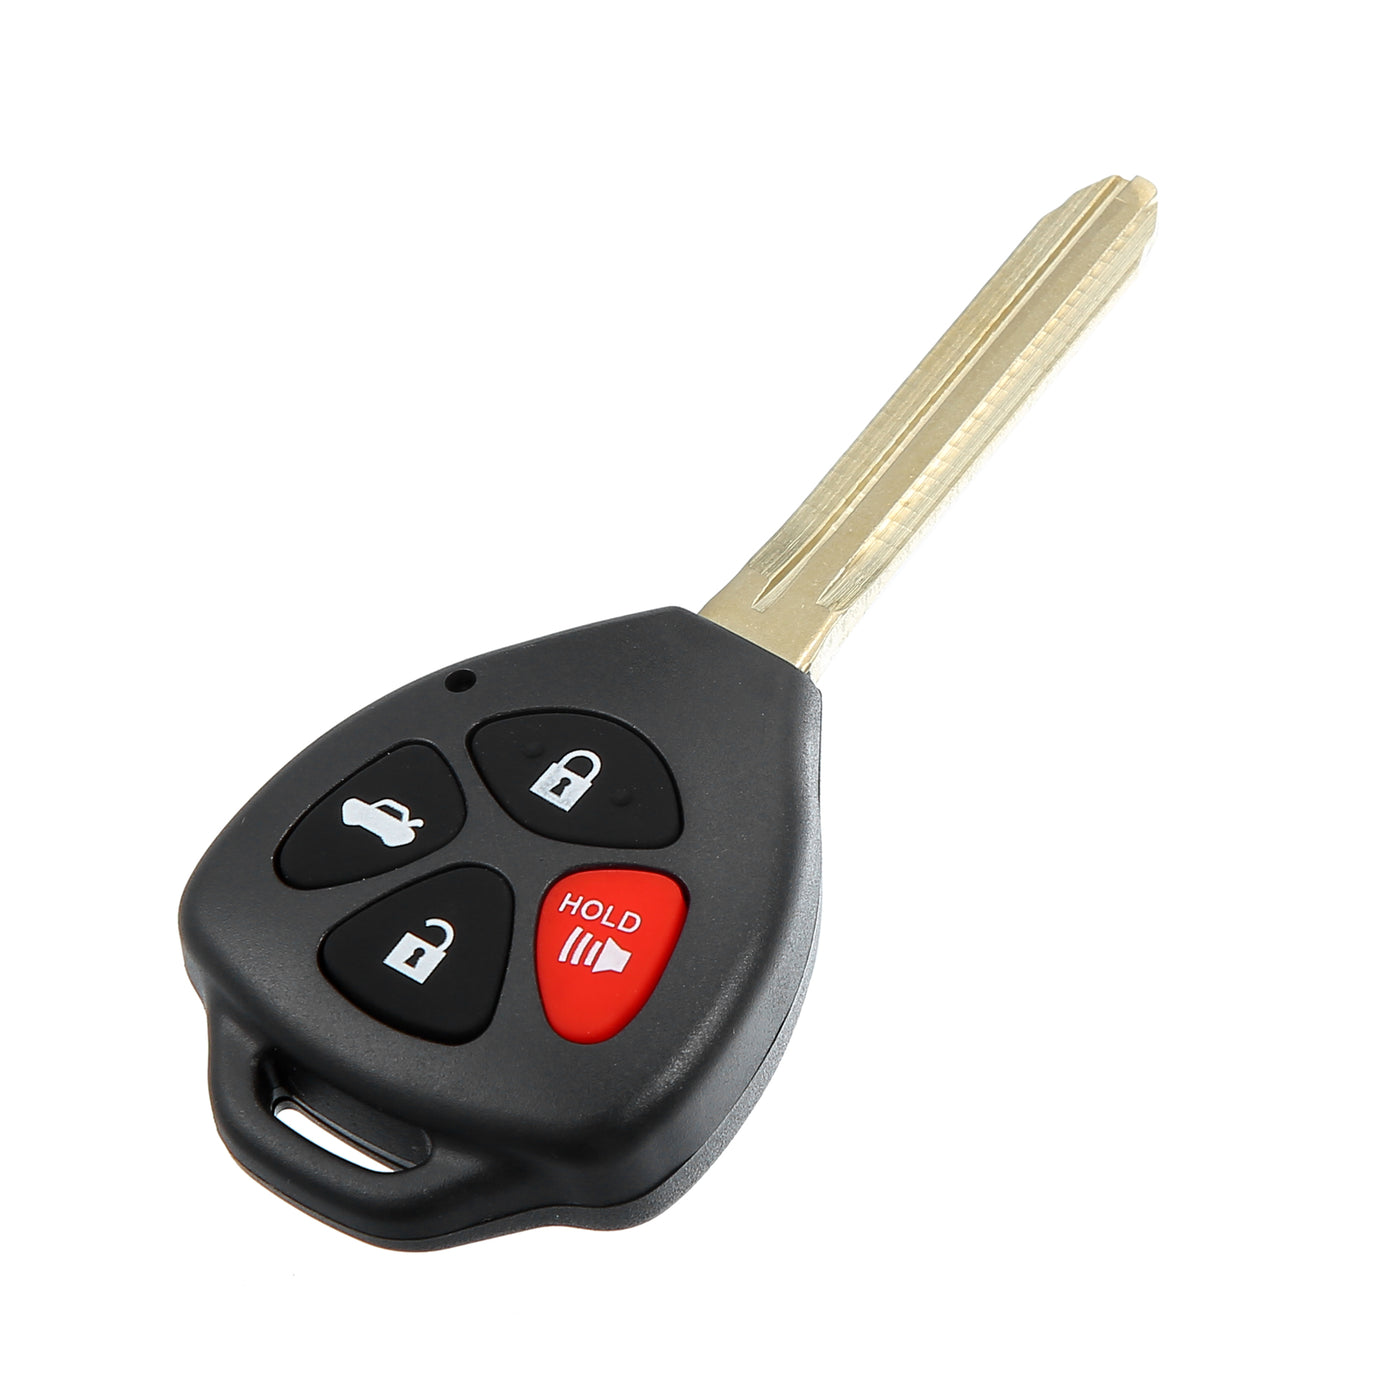 ACROPIX 315 MHz Key Fob Keyless Entry Remote Fit for Toyota Corolla Avalon - Pack of 1 Black